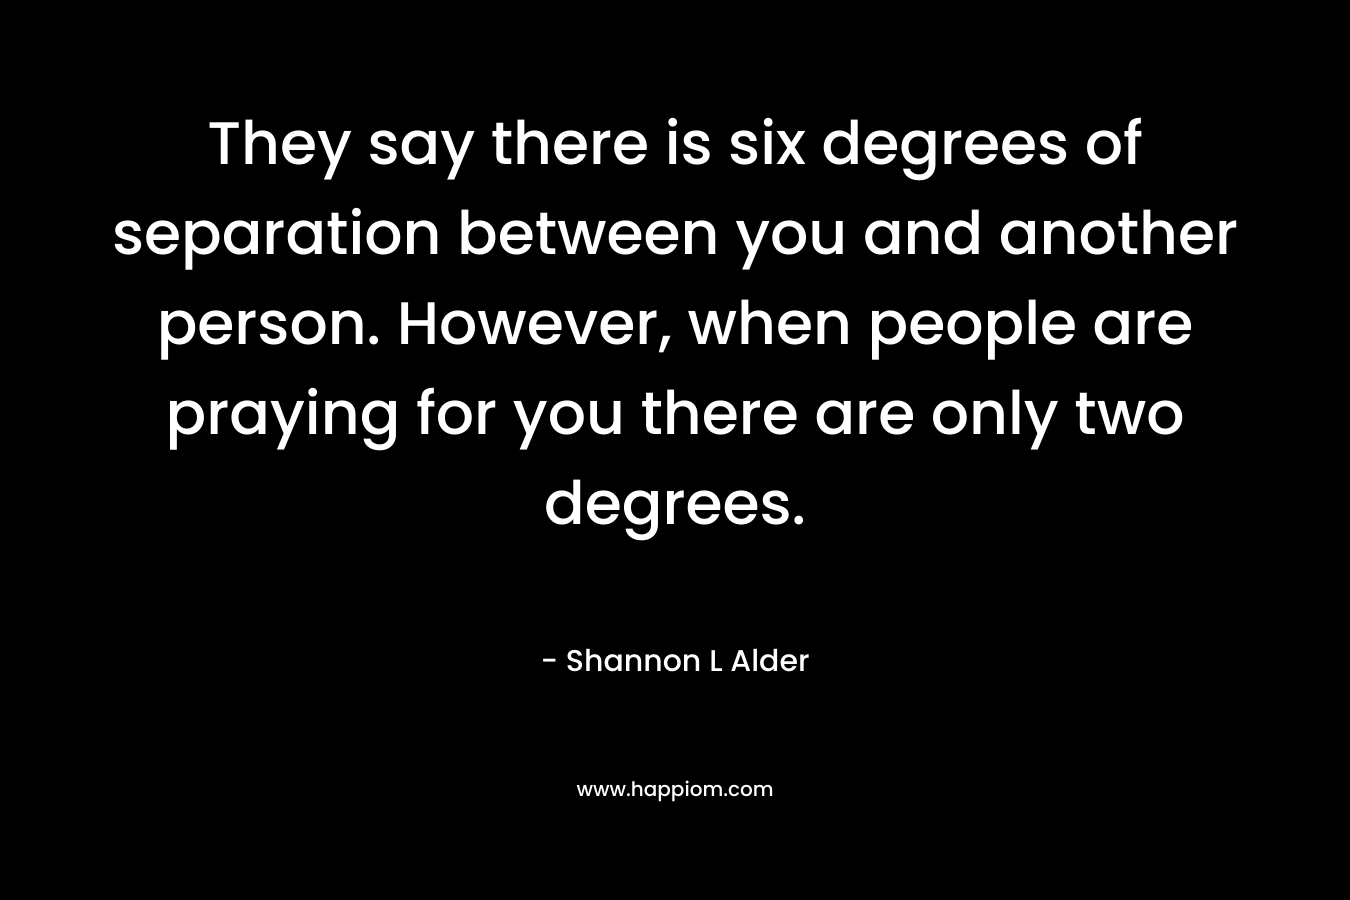 They say there is six degrees of separation between you and another person. However, when people are praying for you there are only two degrees. – Shannon L Alder